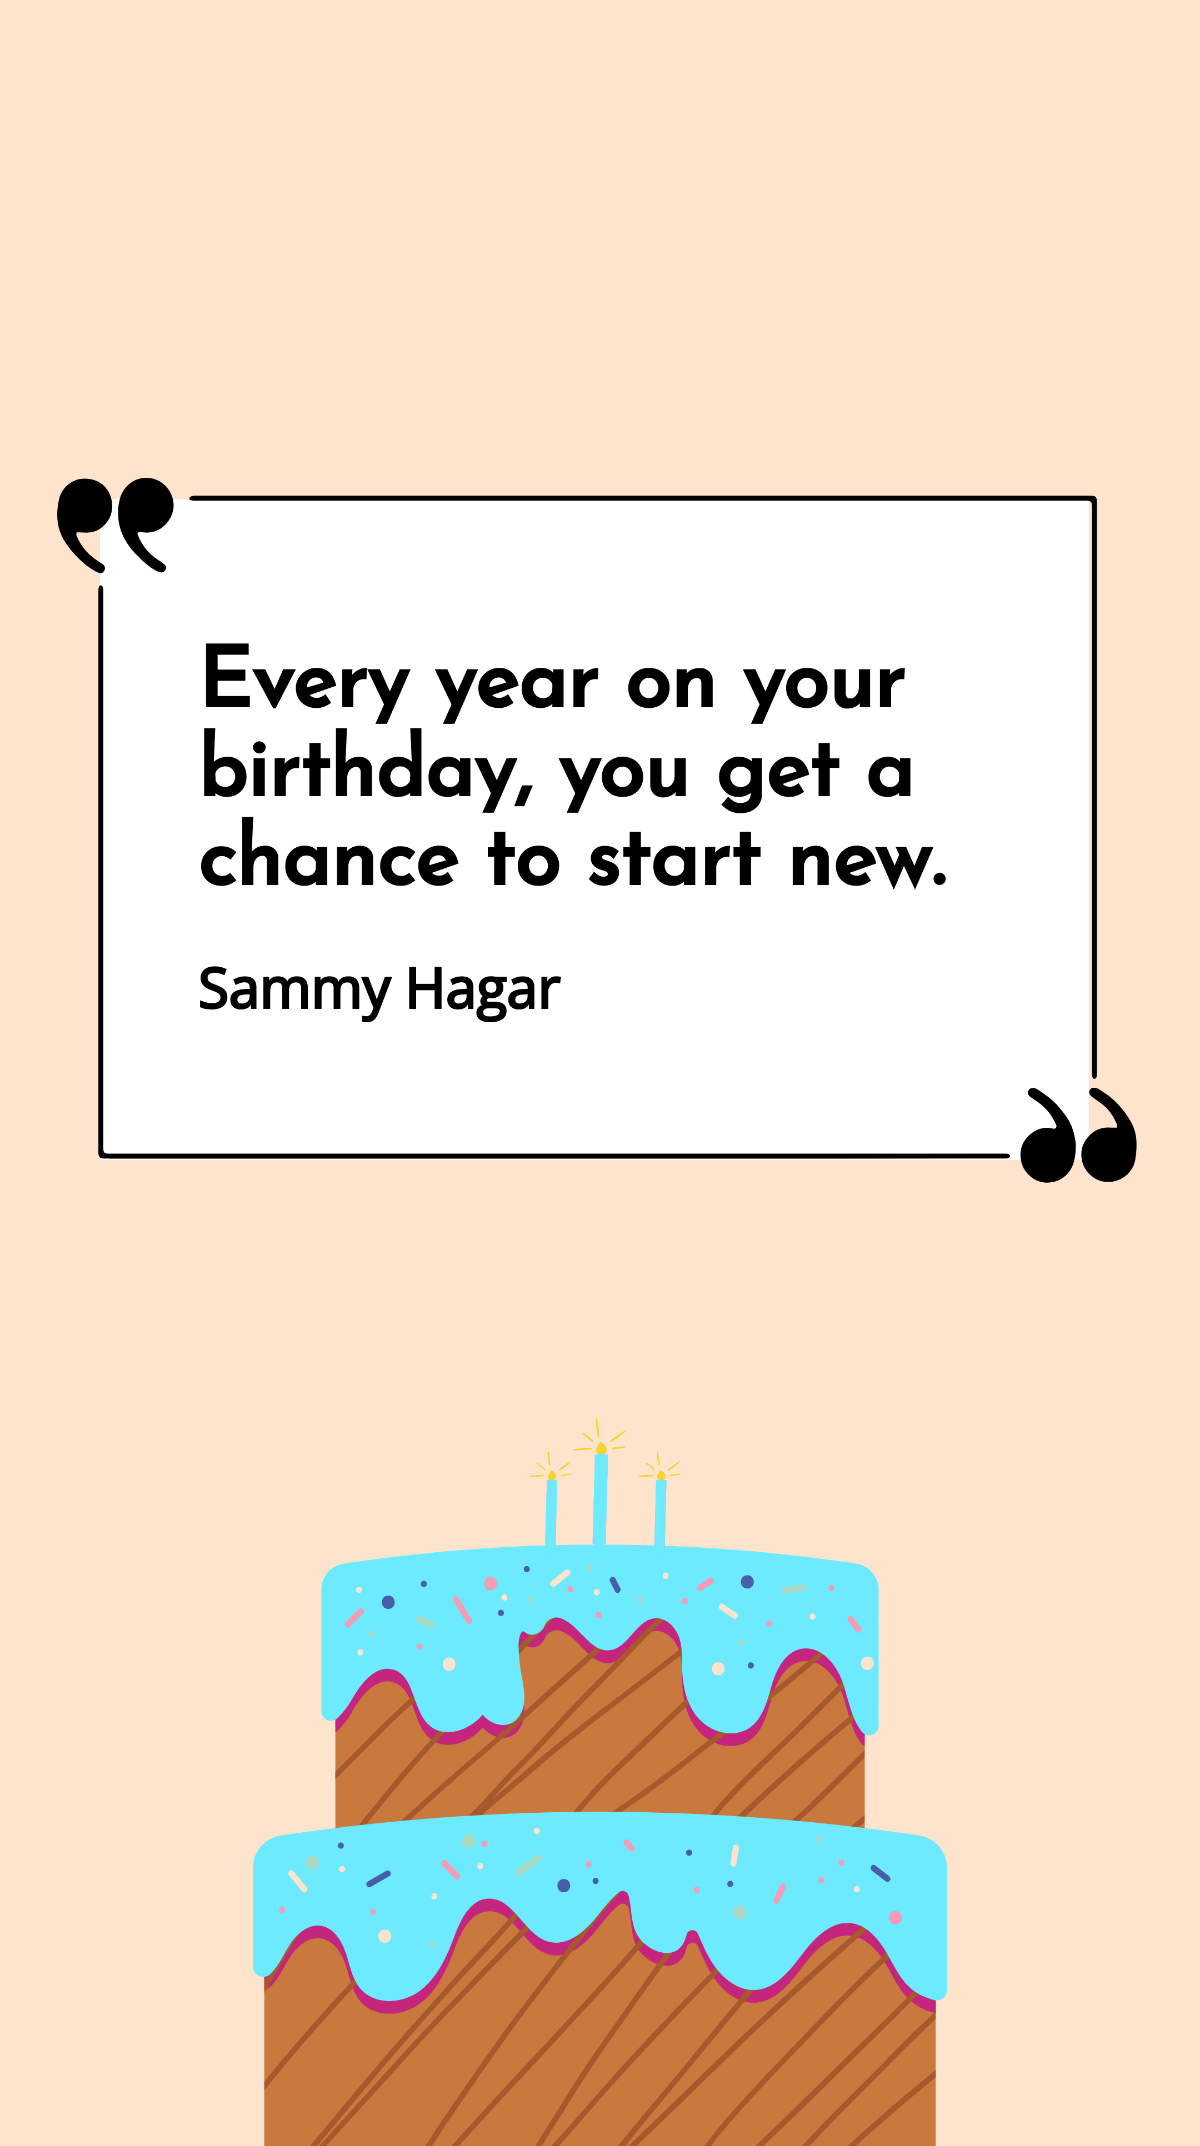 Sammy Hagar - Every year on your birthday, you get a chance to start new.